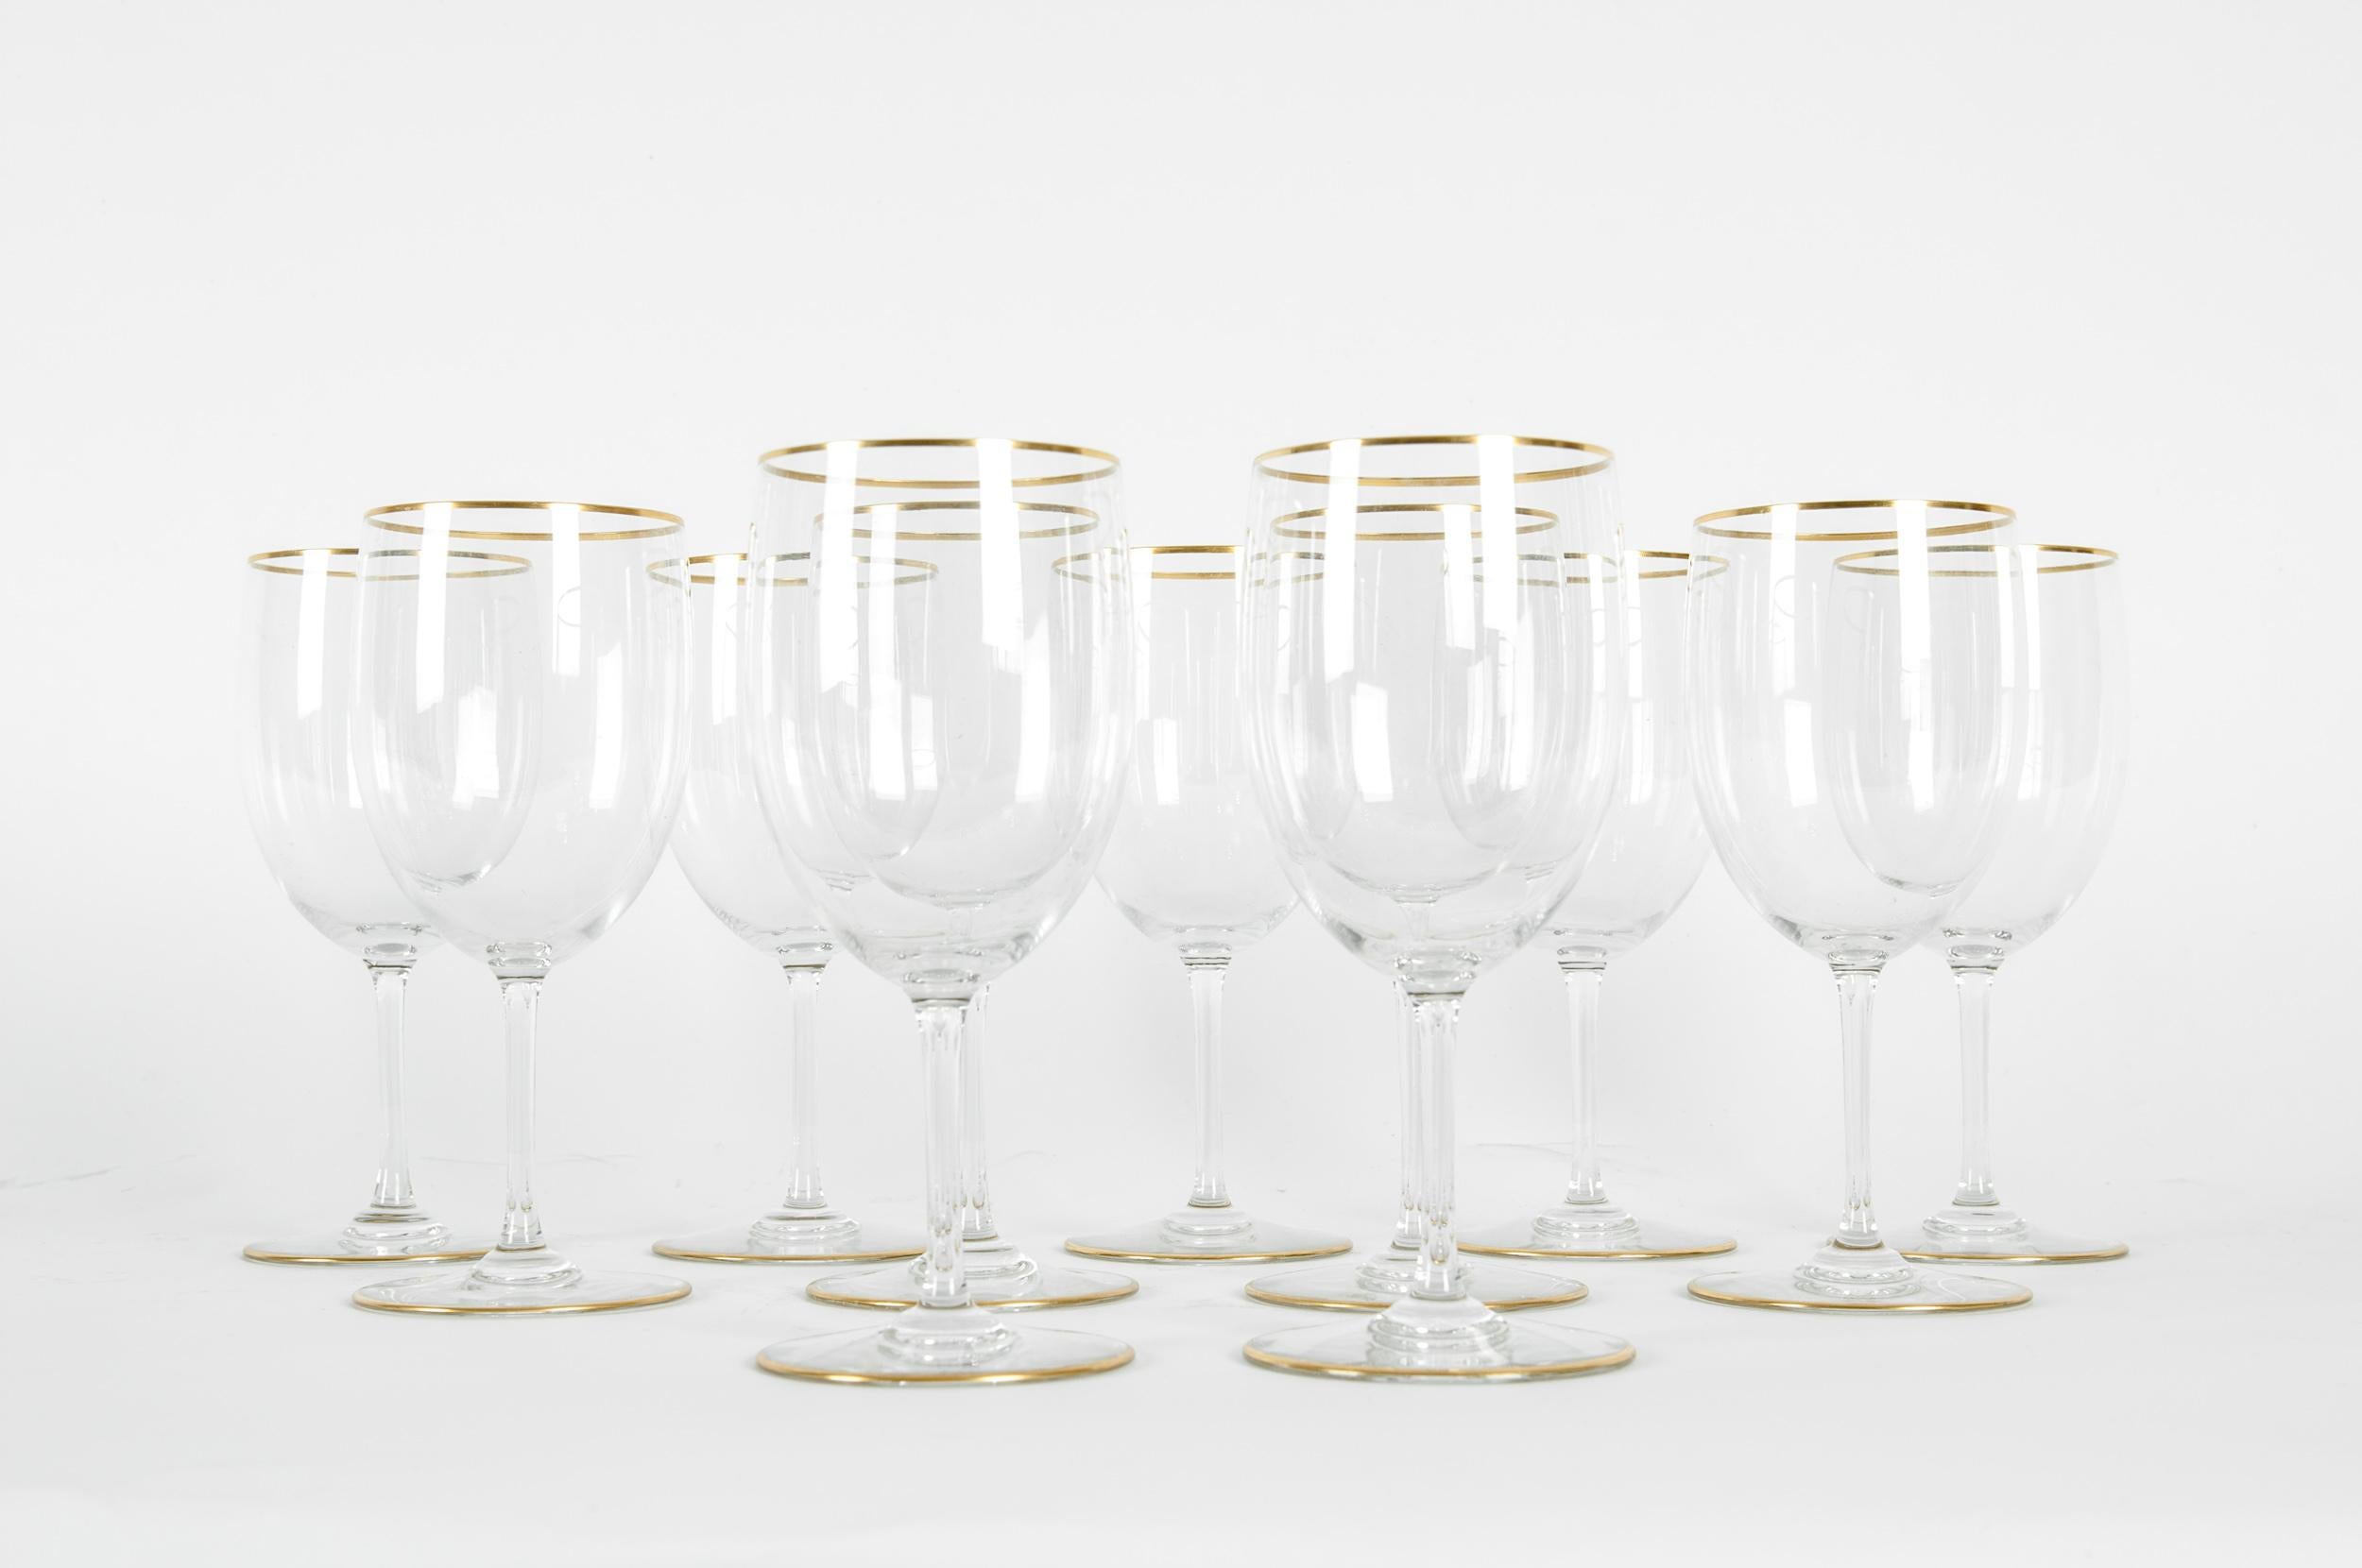 Mid-20th century Baccarat crystal stemware wine, water service for eleven people with gold trim details. Each glass is in great vintage condition. Maker's mark undersigned. Minor wear consistent with age / use . Each glass measure about 6.7 inches